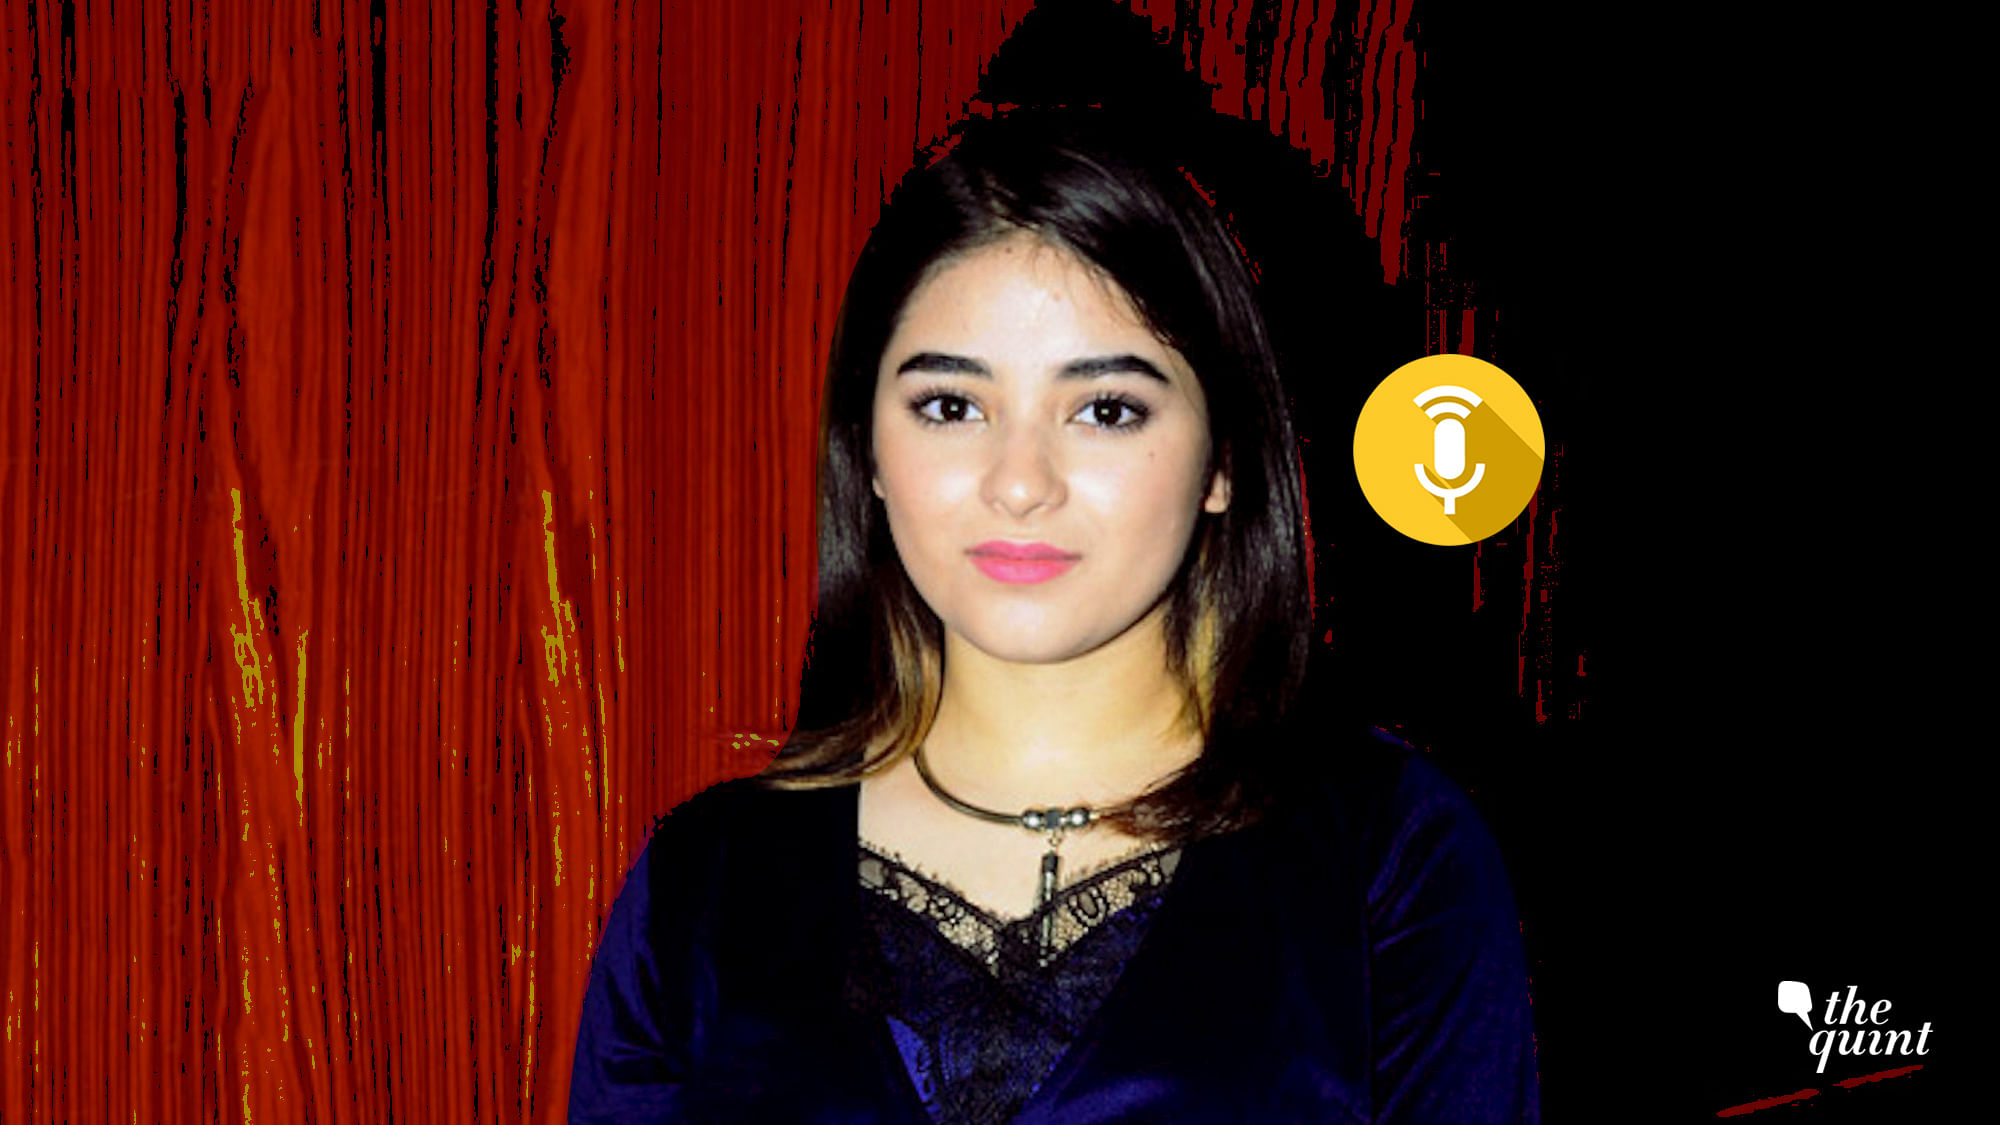 Four years after she burst into Bollywood, Zaira Wasim announced that she would no longer be a part of the establishment.